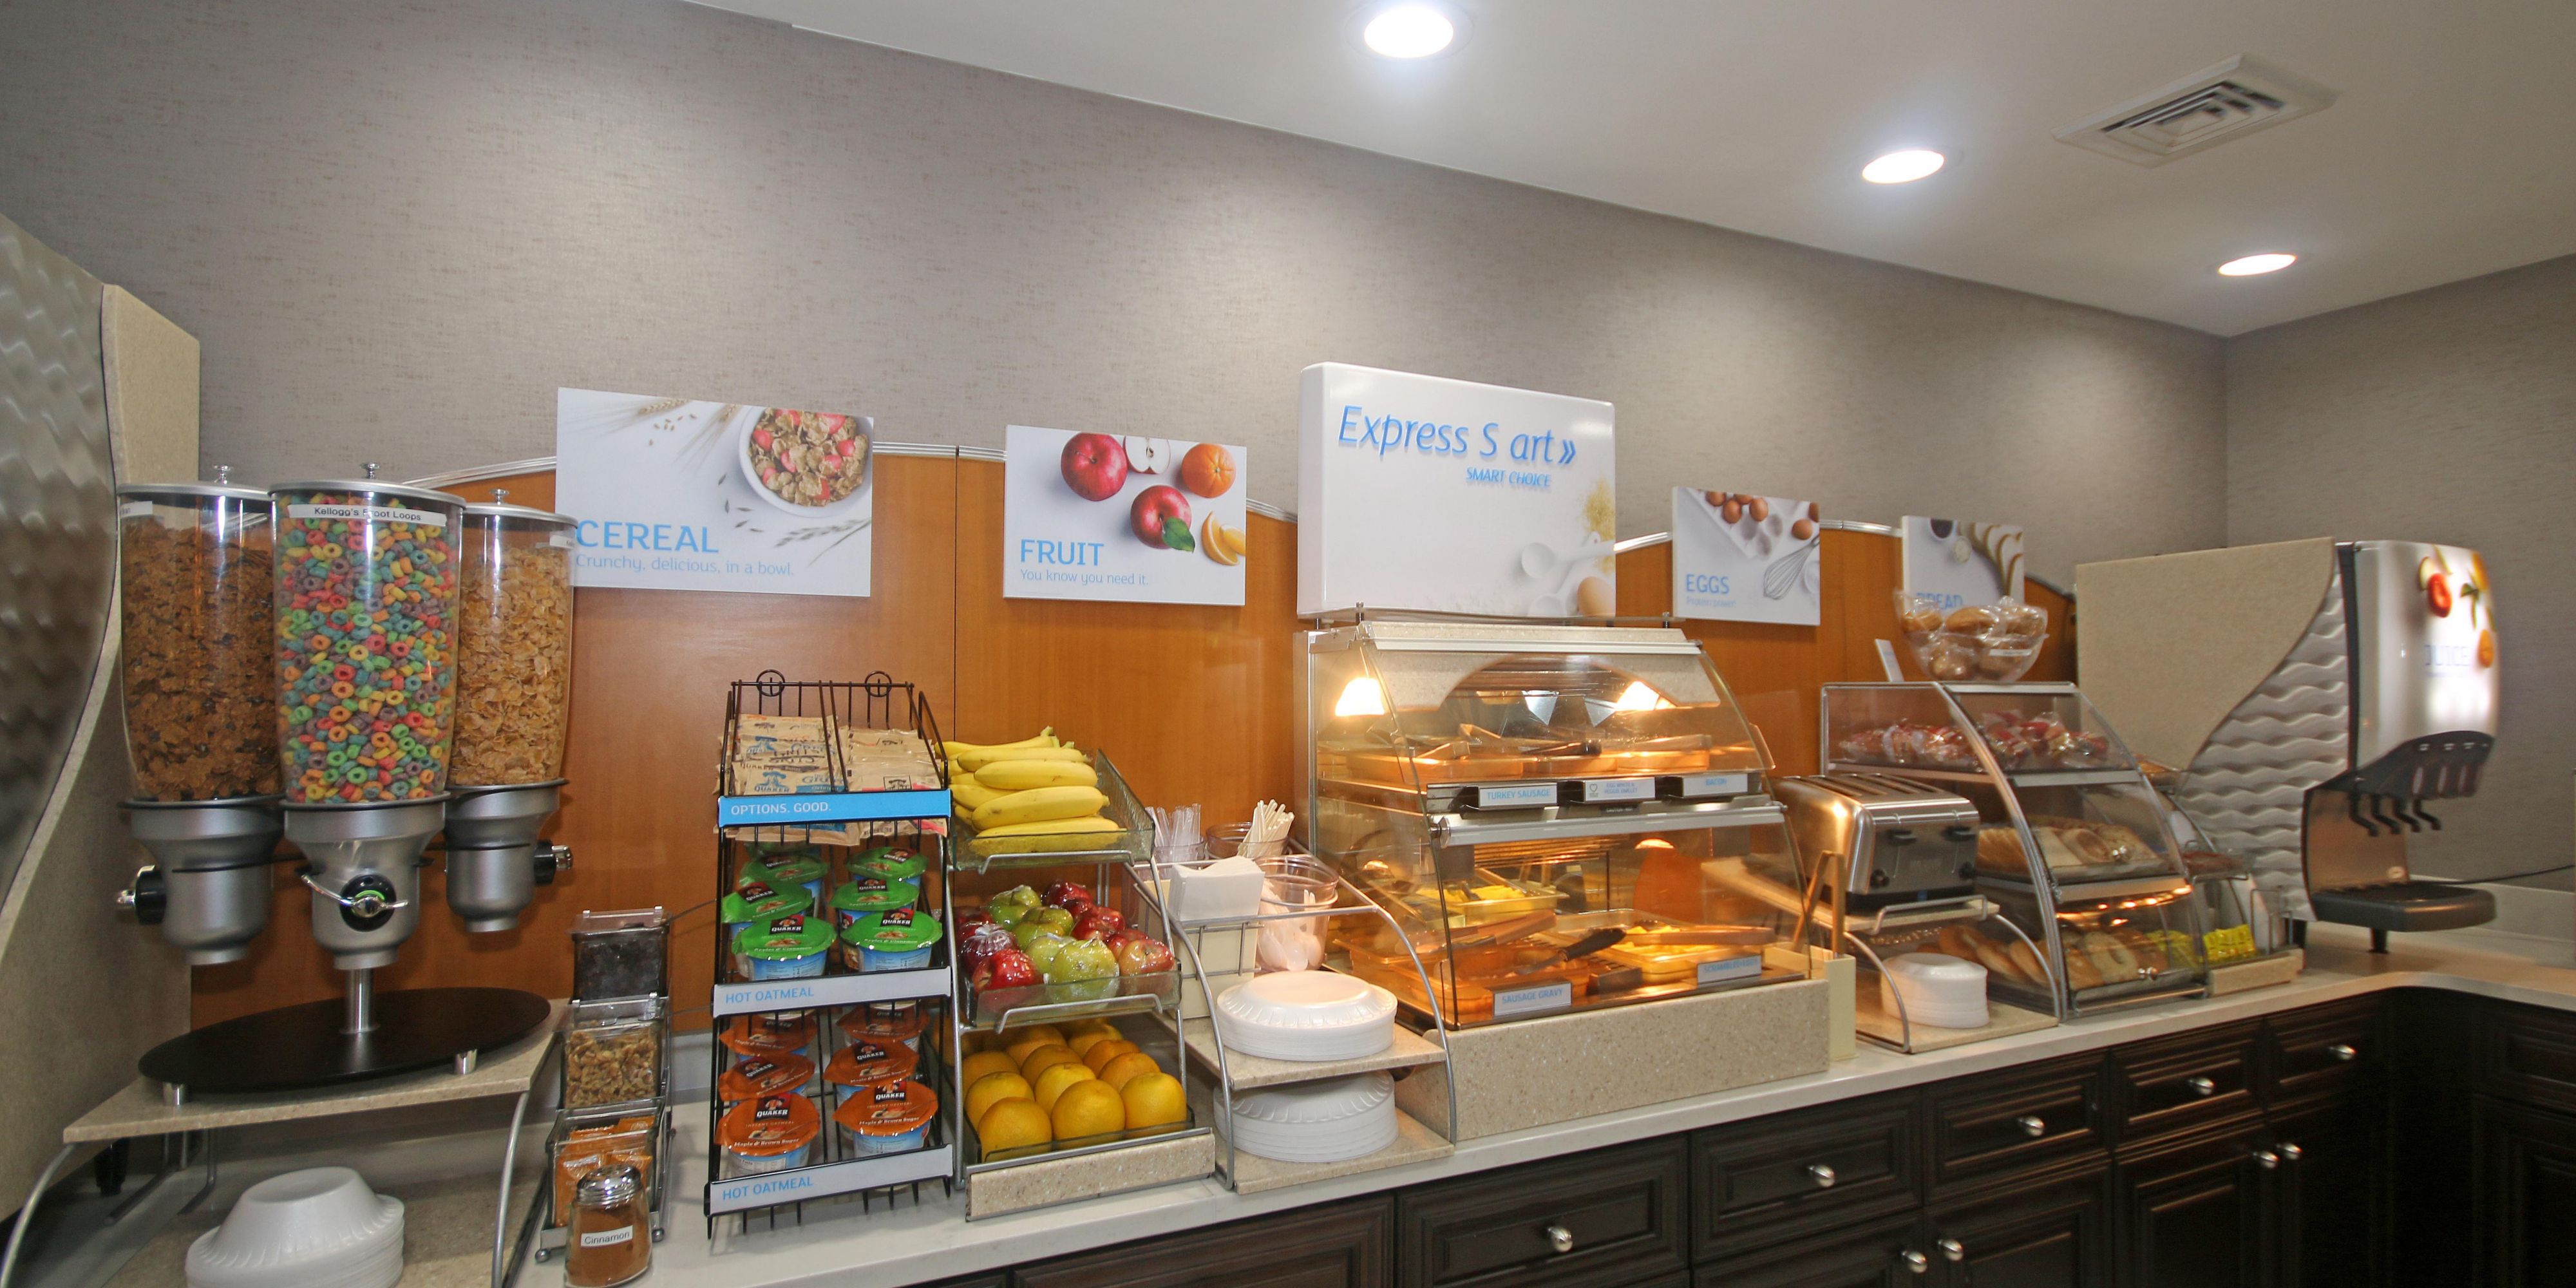 Our complimentary Express Start Breakfast bar offers  Hot Breakfast, cold items, juices, and coffee. Socially distanced seating is also available.